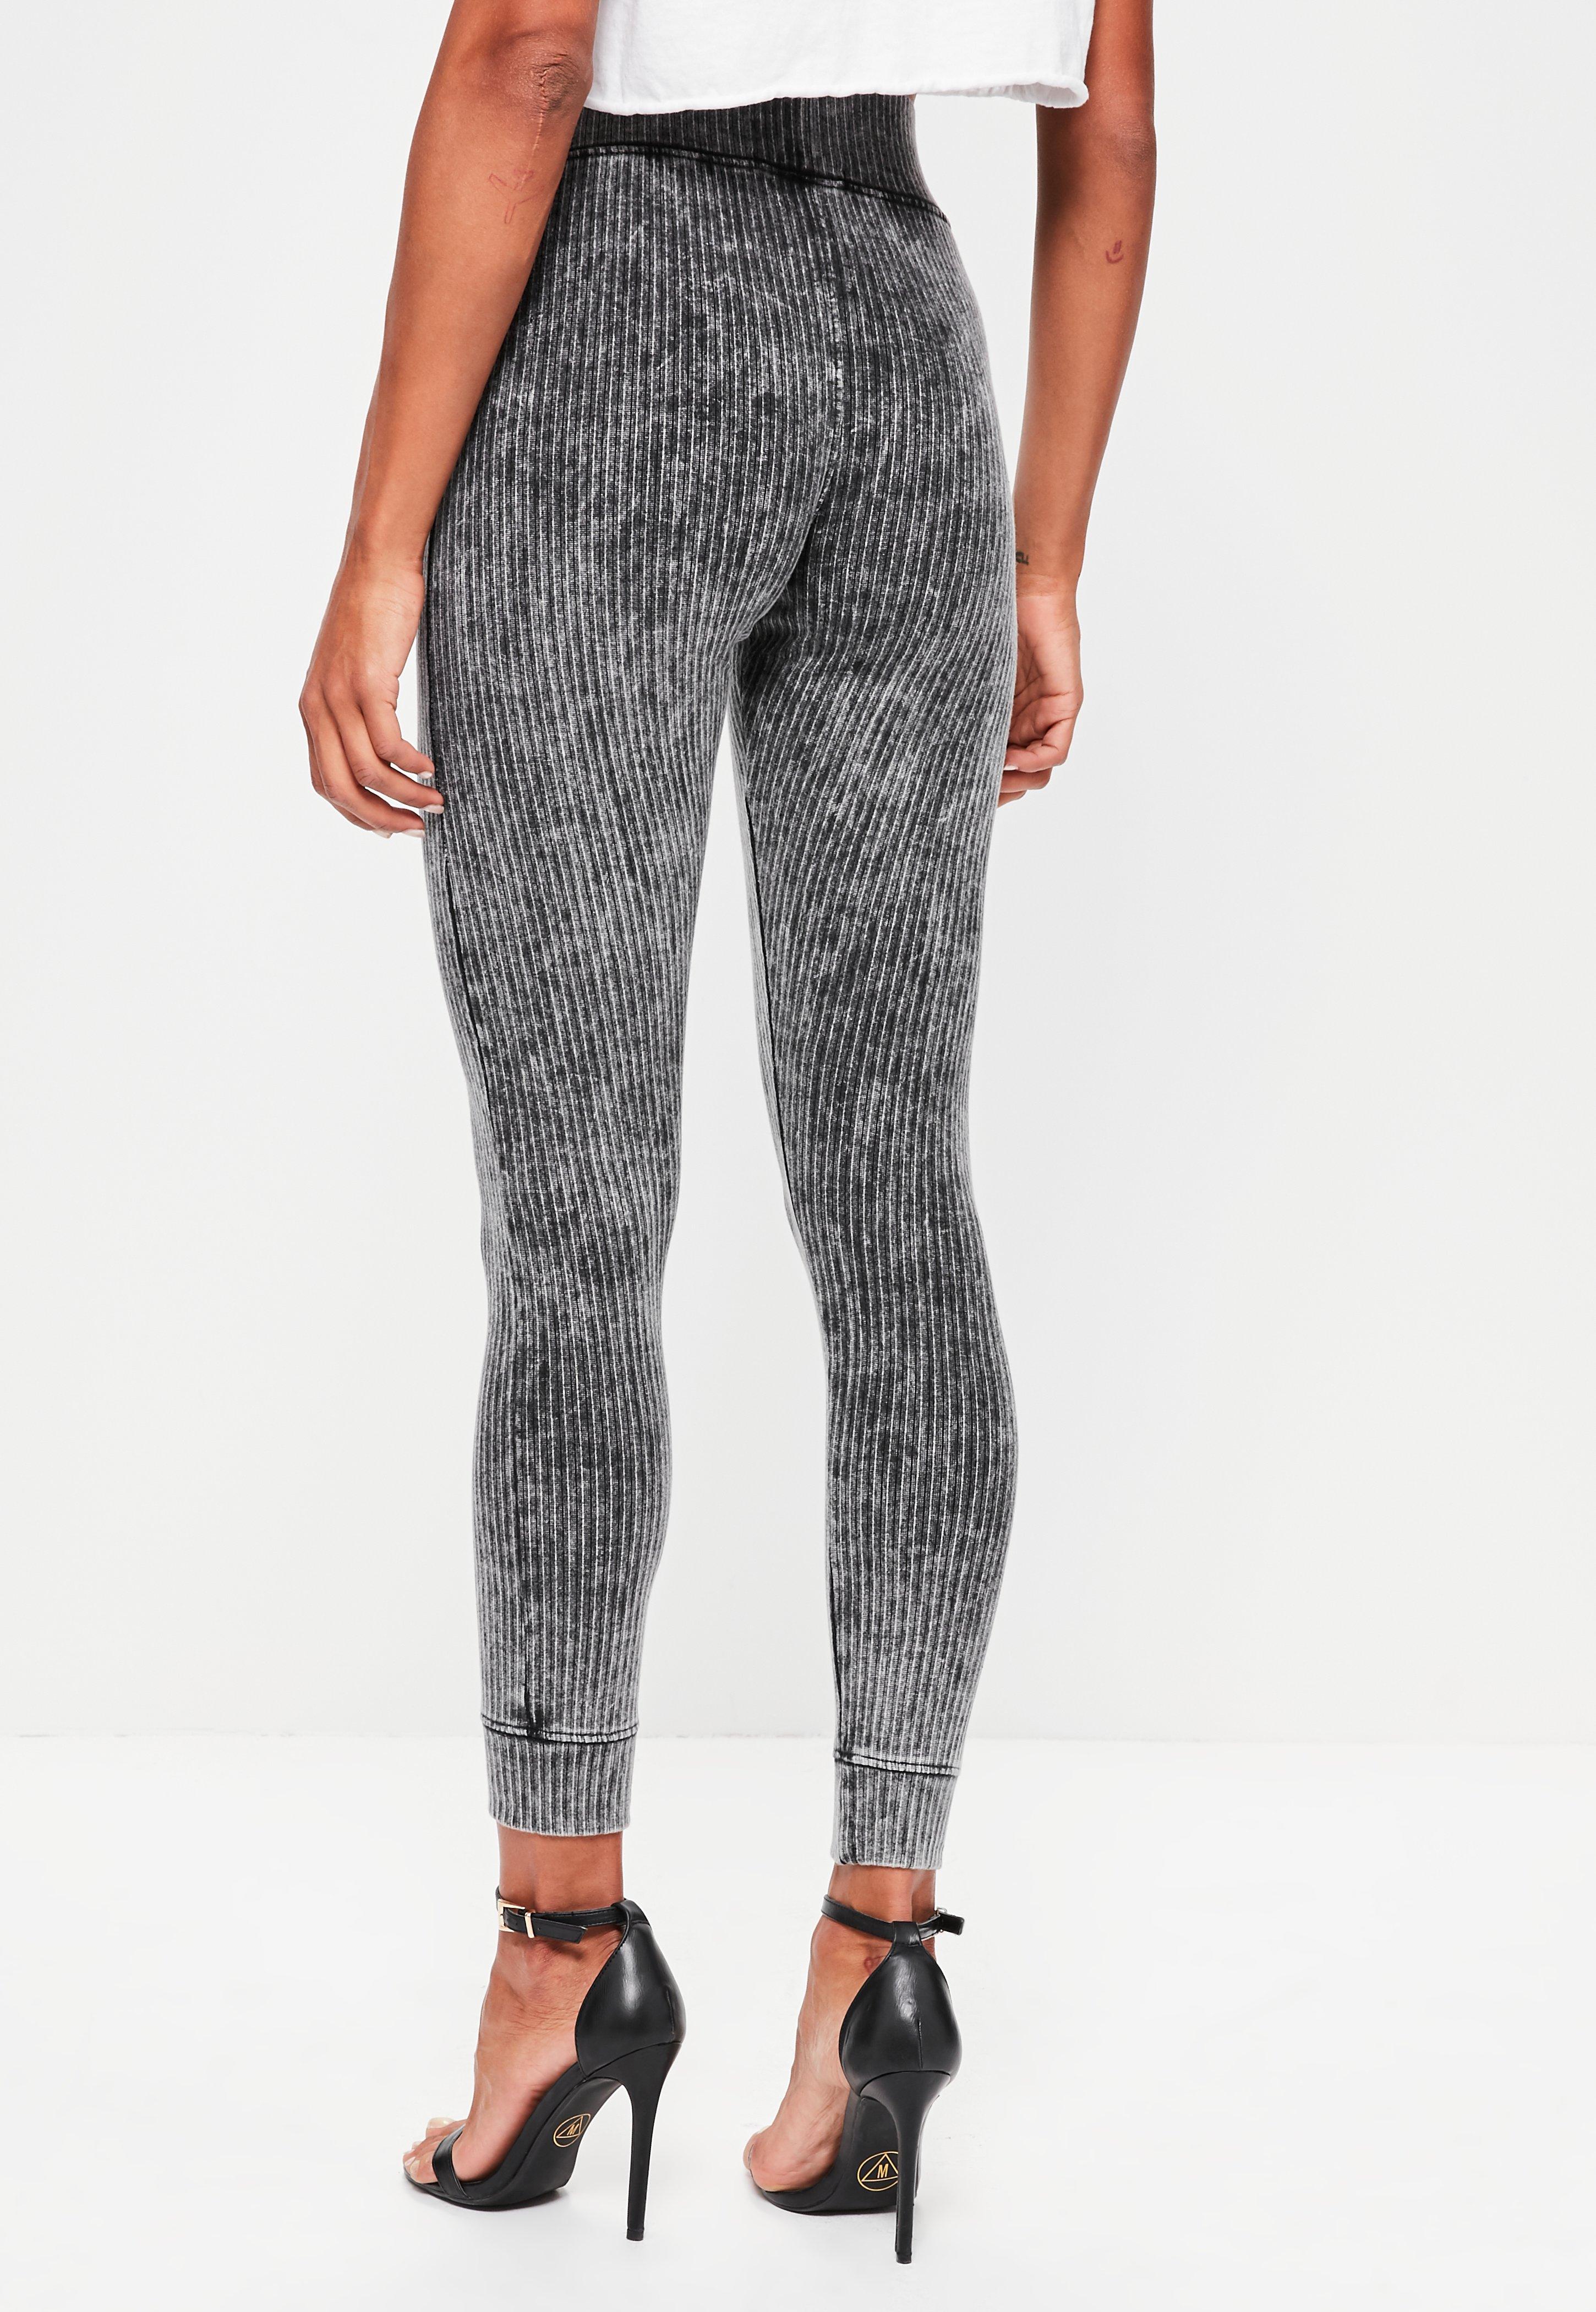 Missguided, Washed High Waisted Rib Leggings, Charcoal